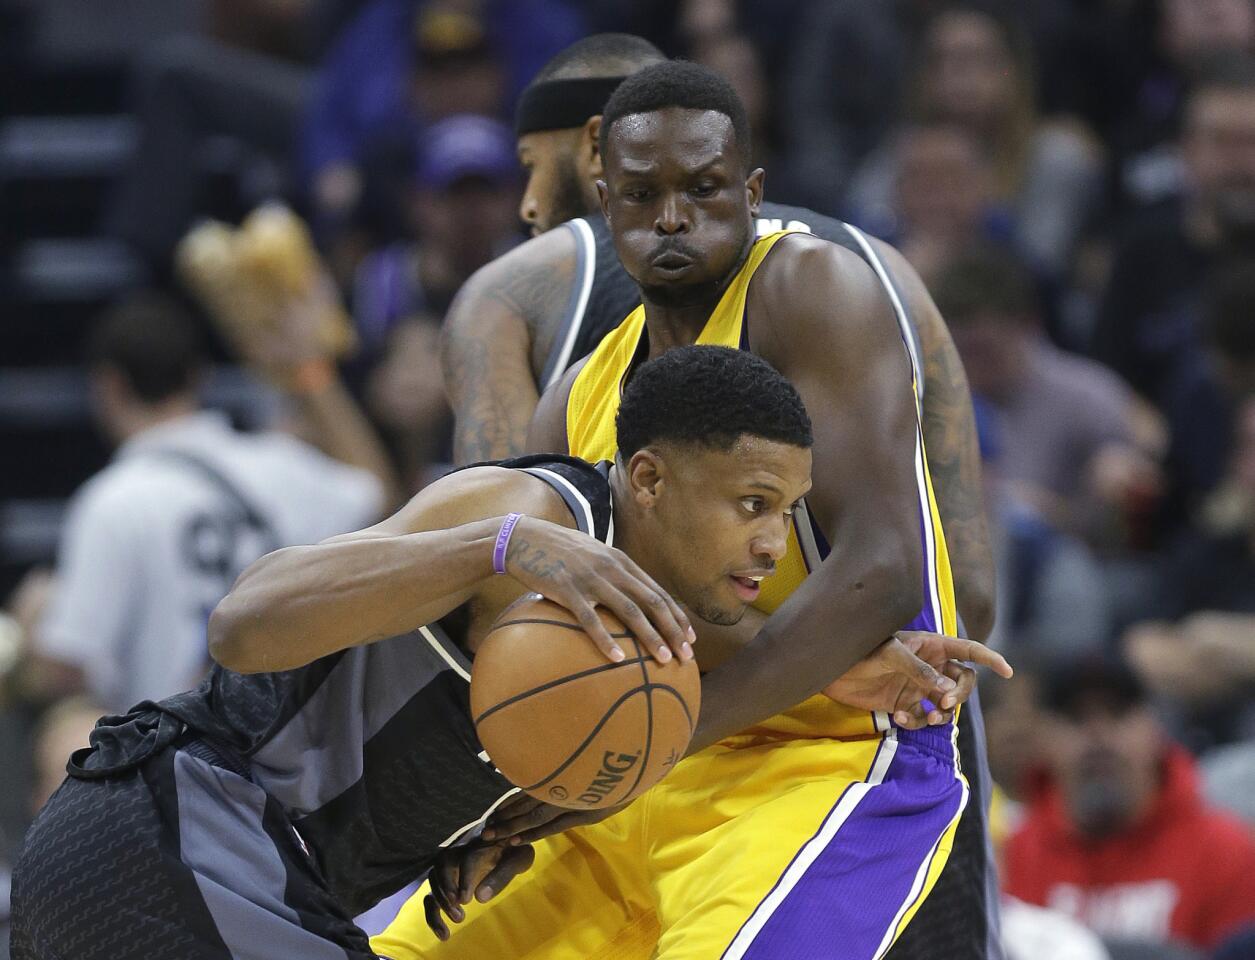 Kings forward Rudy Gay, left, tries to drive past Lakers forward Luol Deng during the first quarter.